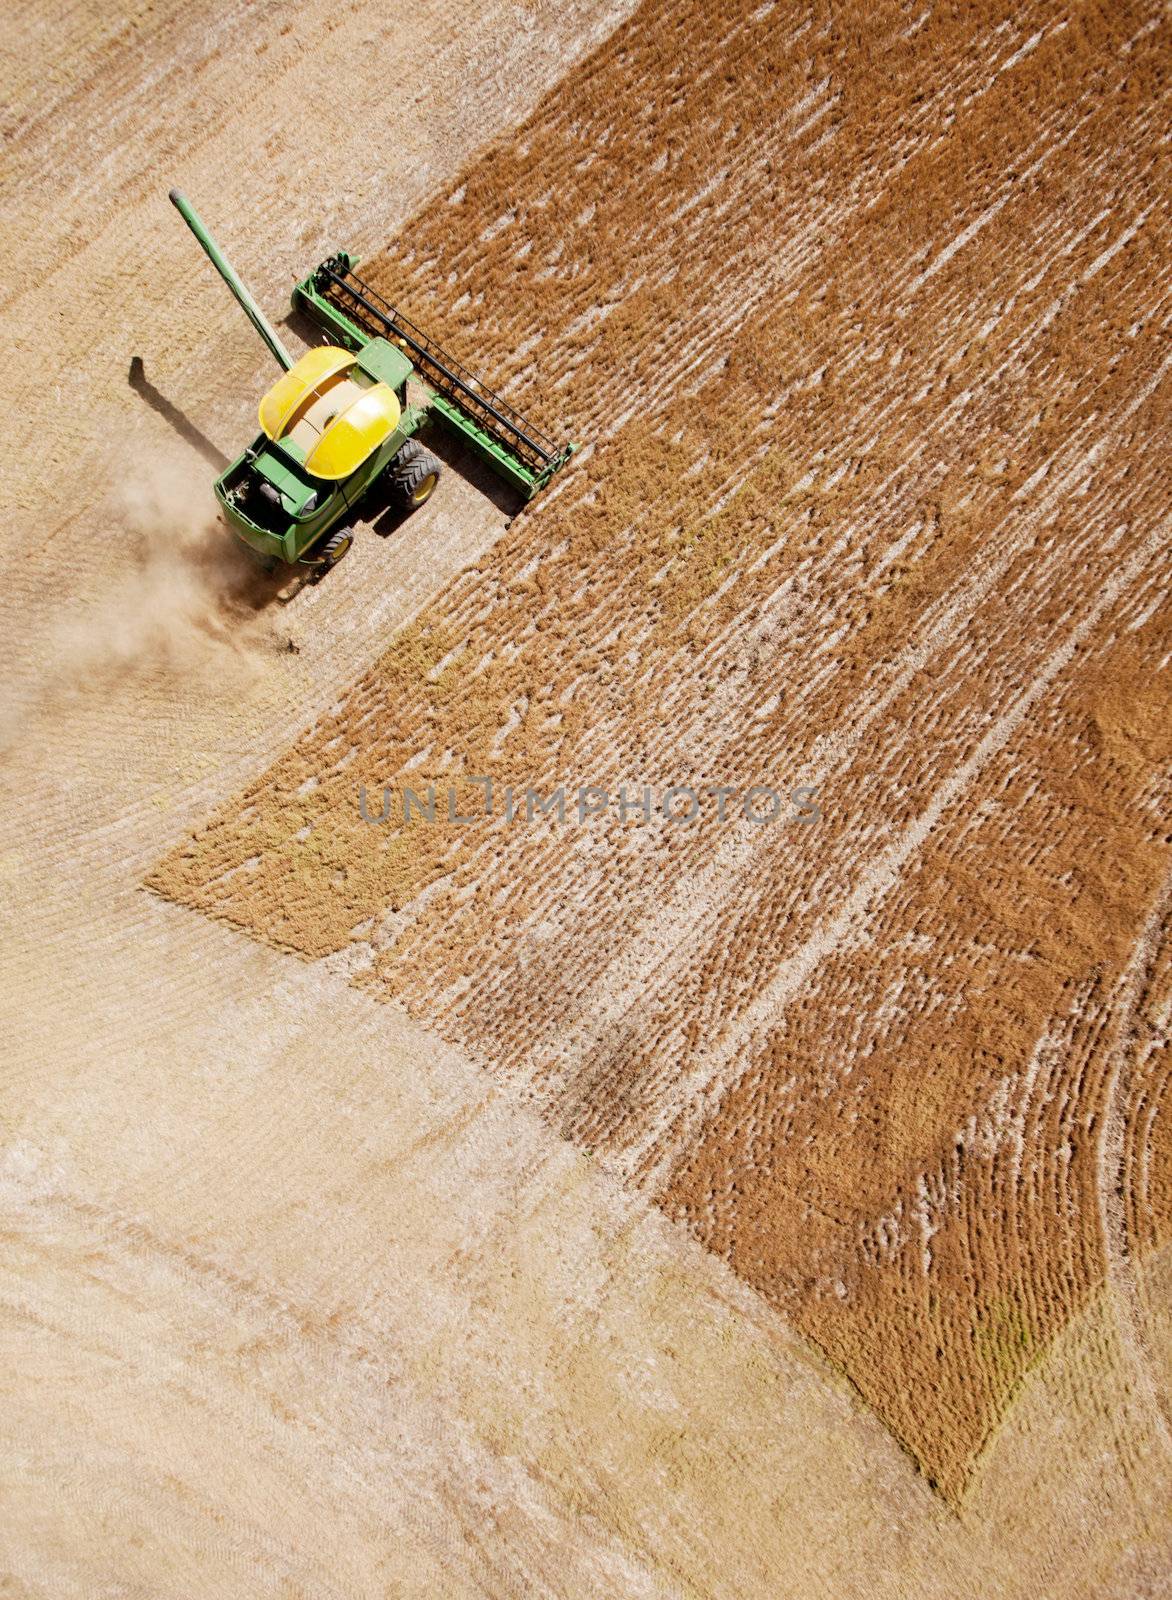 Green harvester combining a field of lentils on the prairie